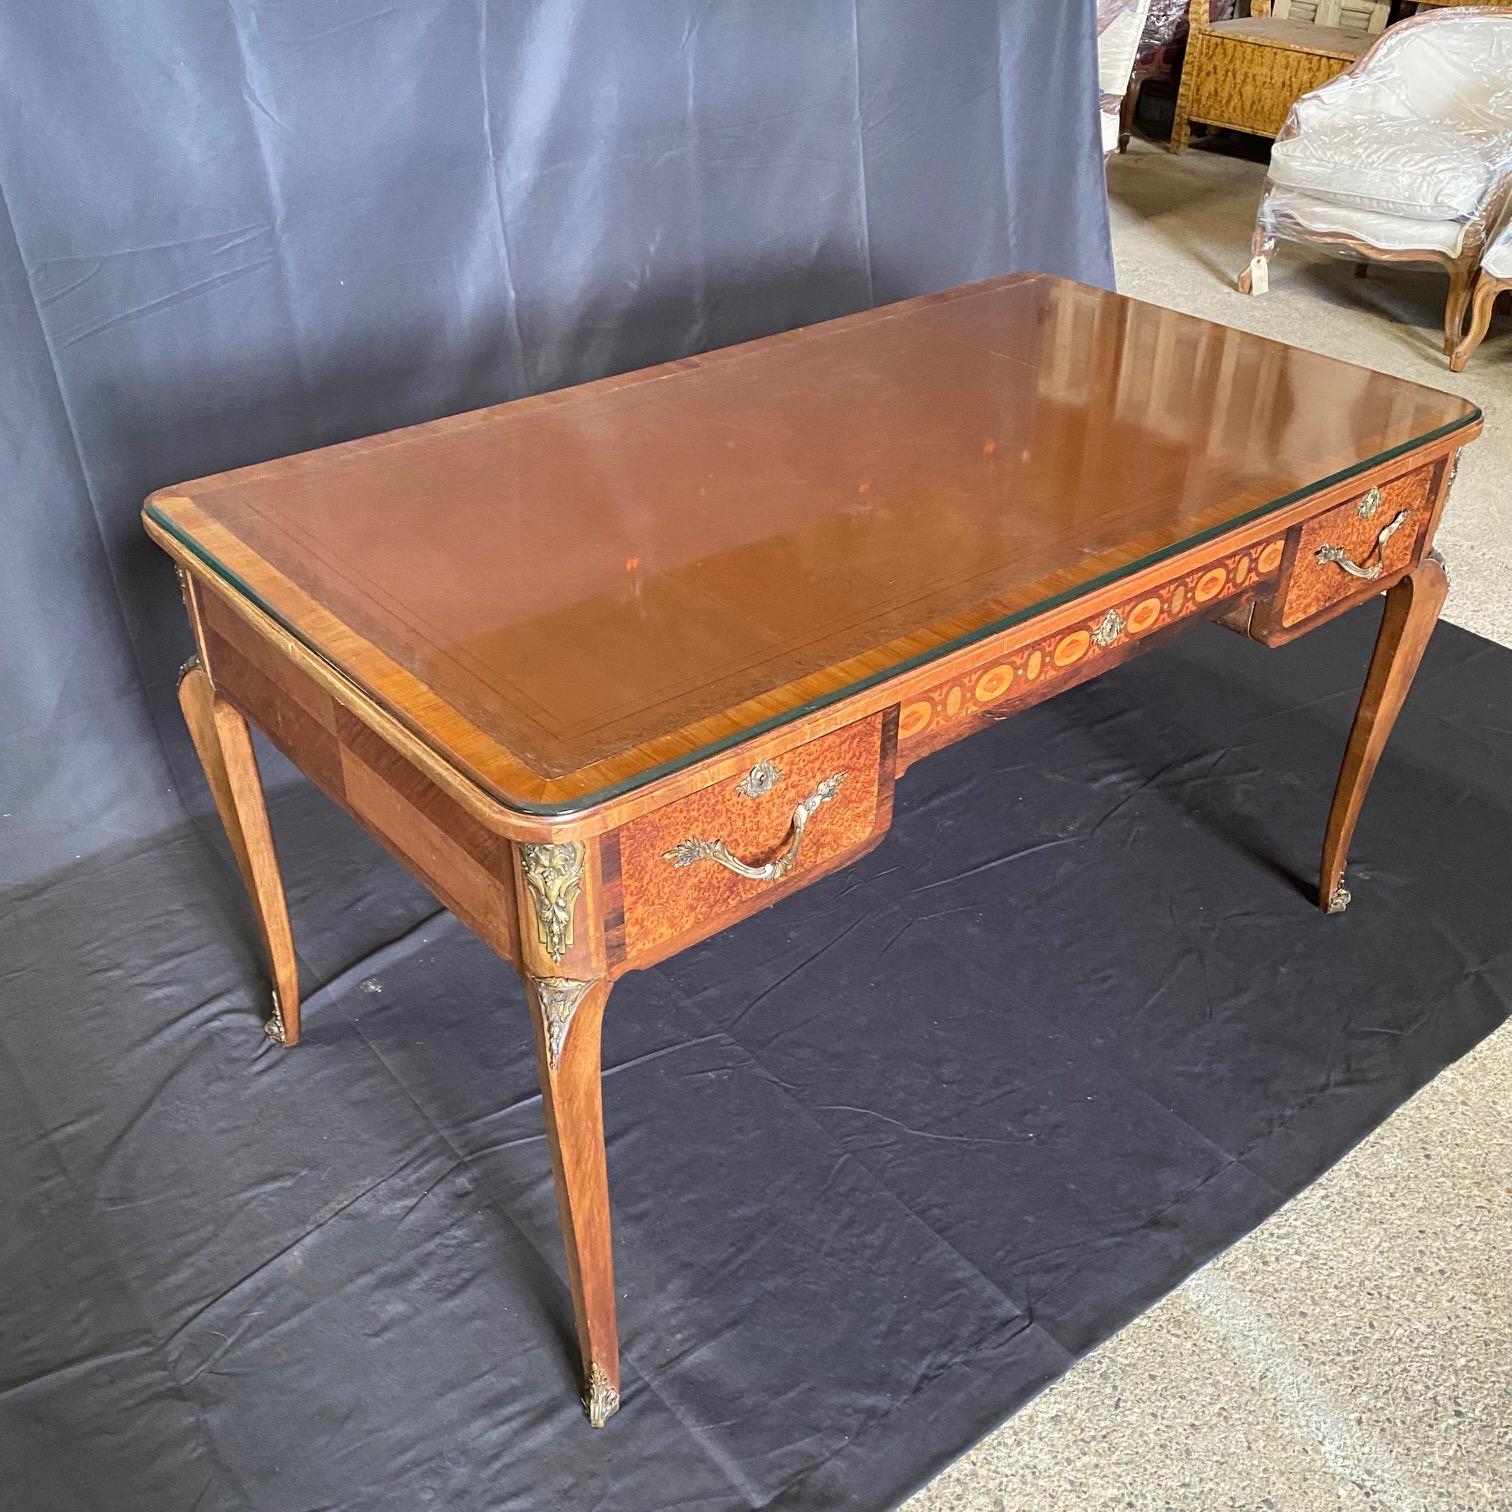  French 19th Century Leather Top Louis XV Style Writing Desk or Bureau Plat In Good Condition For Sale In Hopewell, NJ